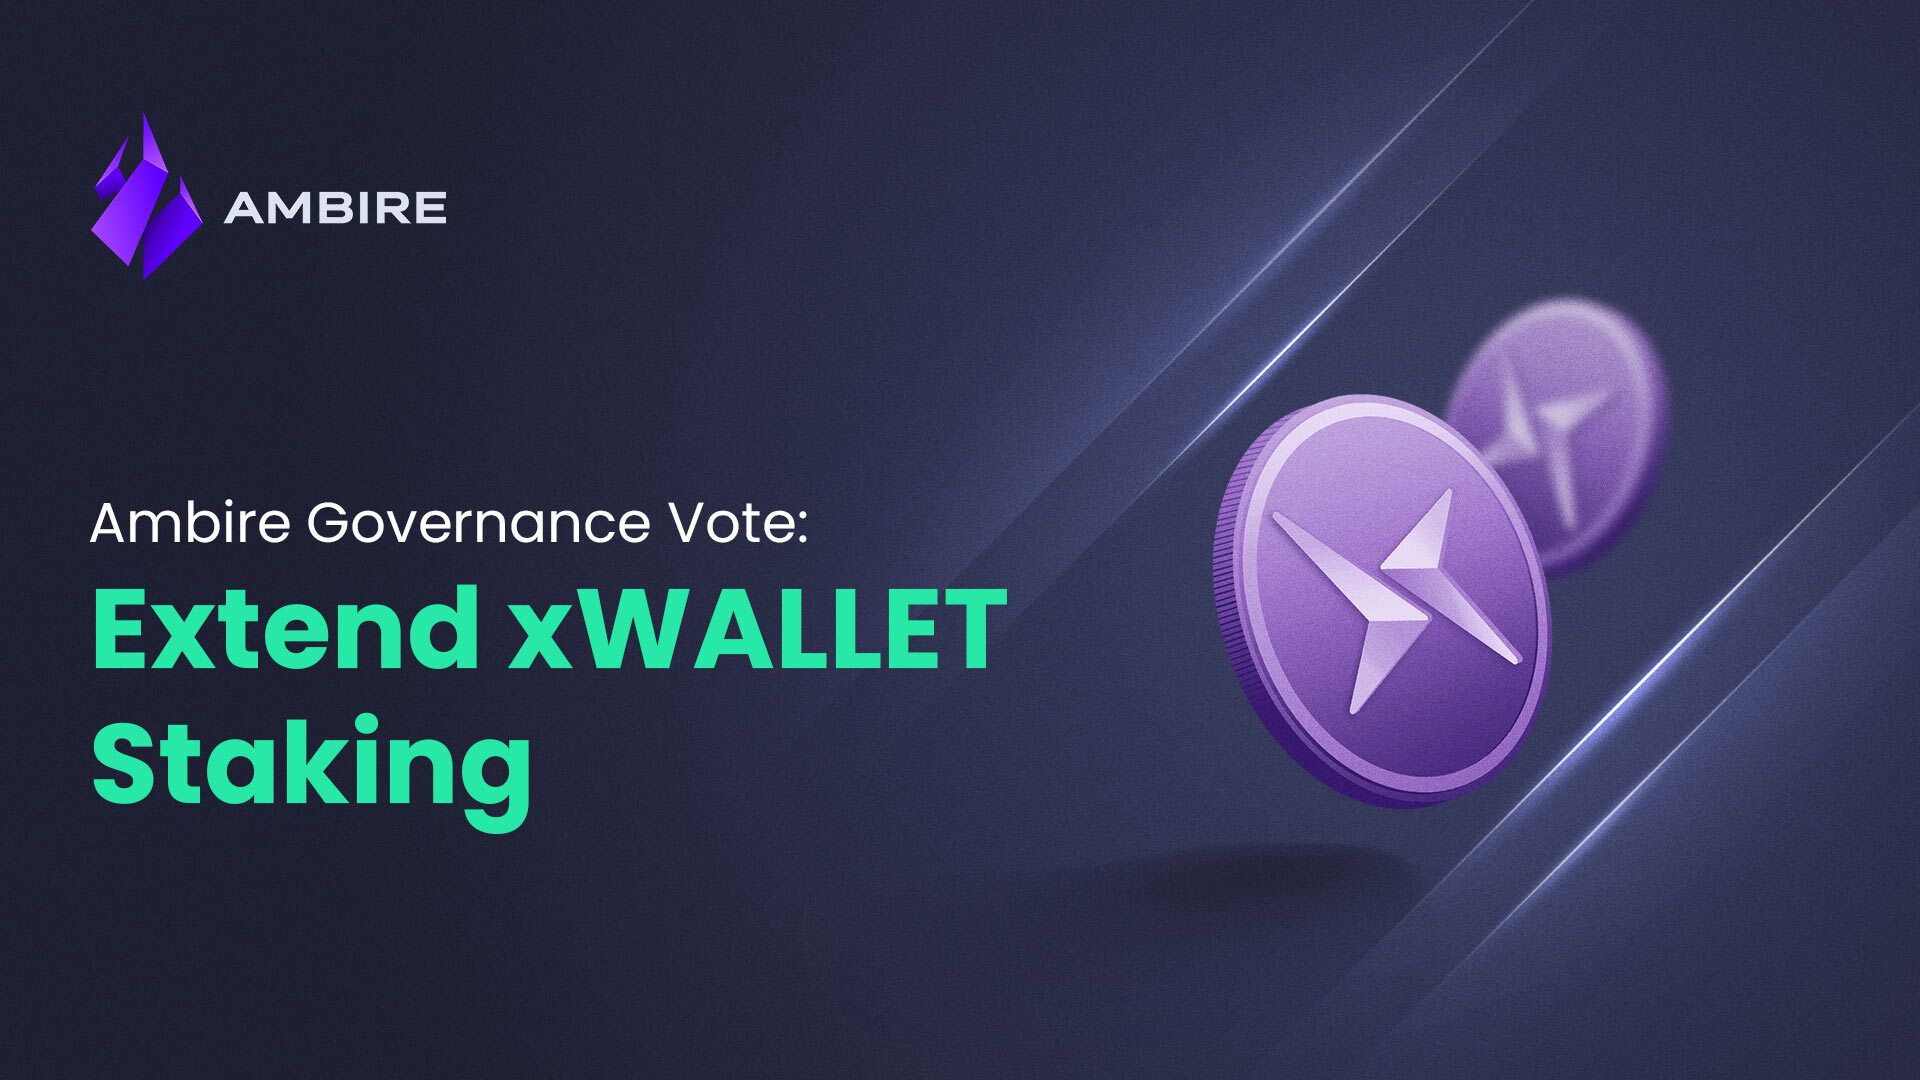 Ambire Governance Vote: Extend xWALLET Staking